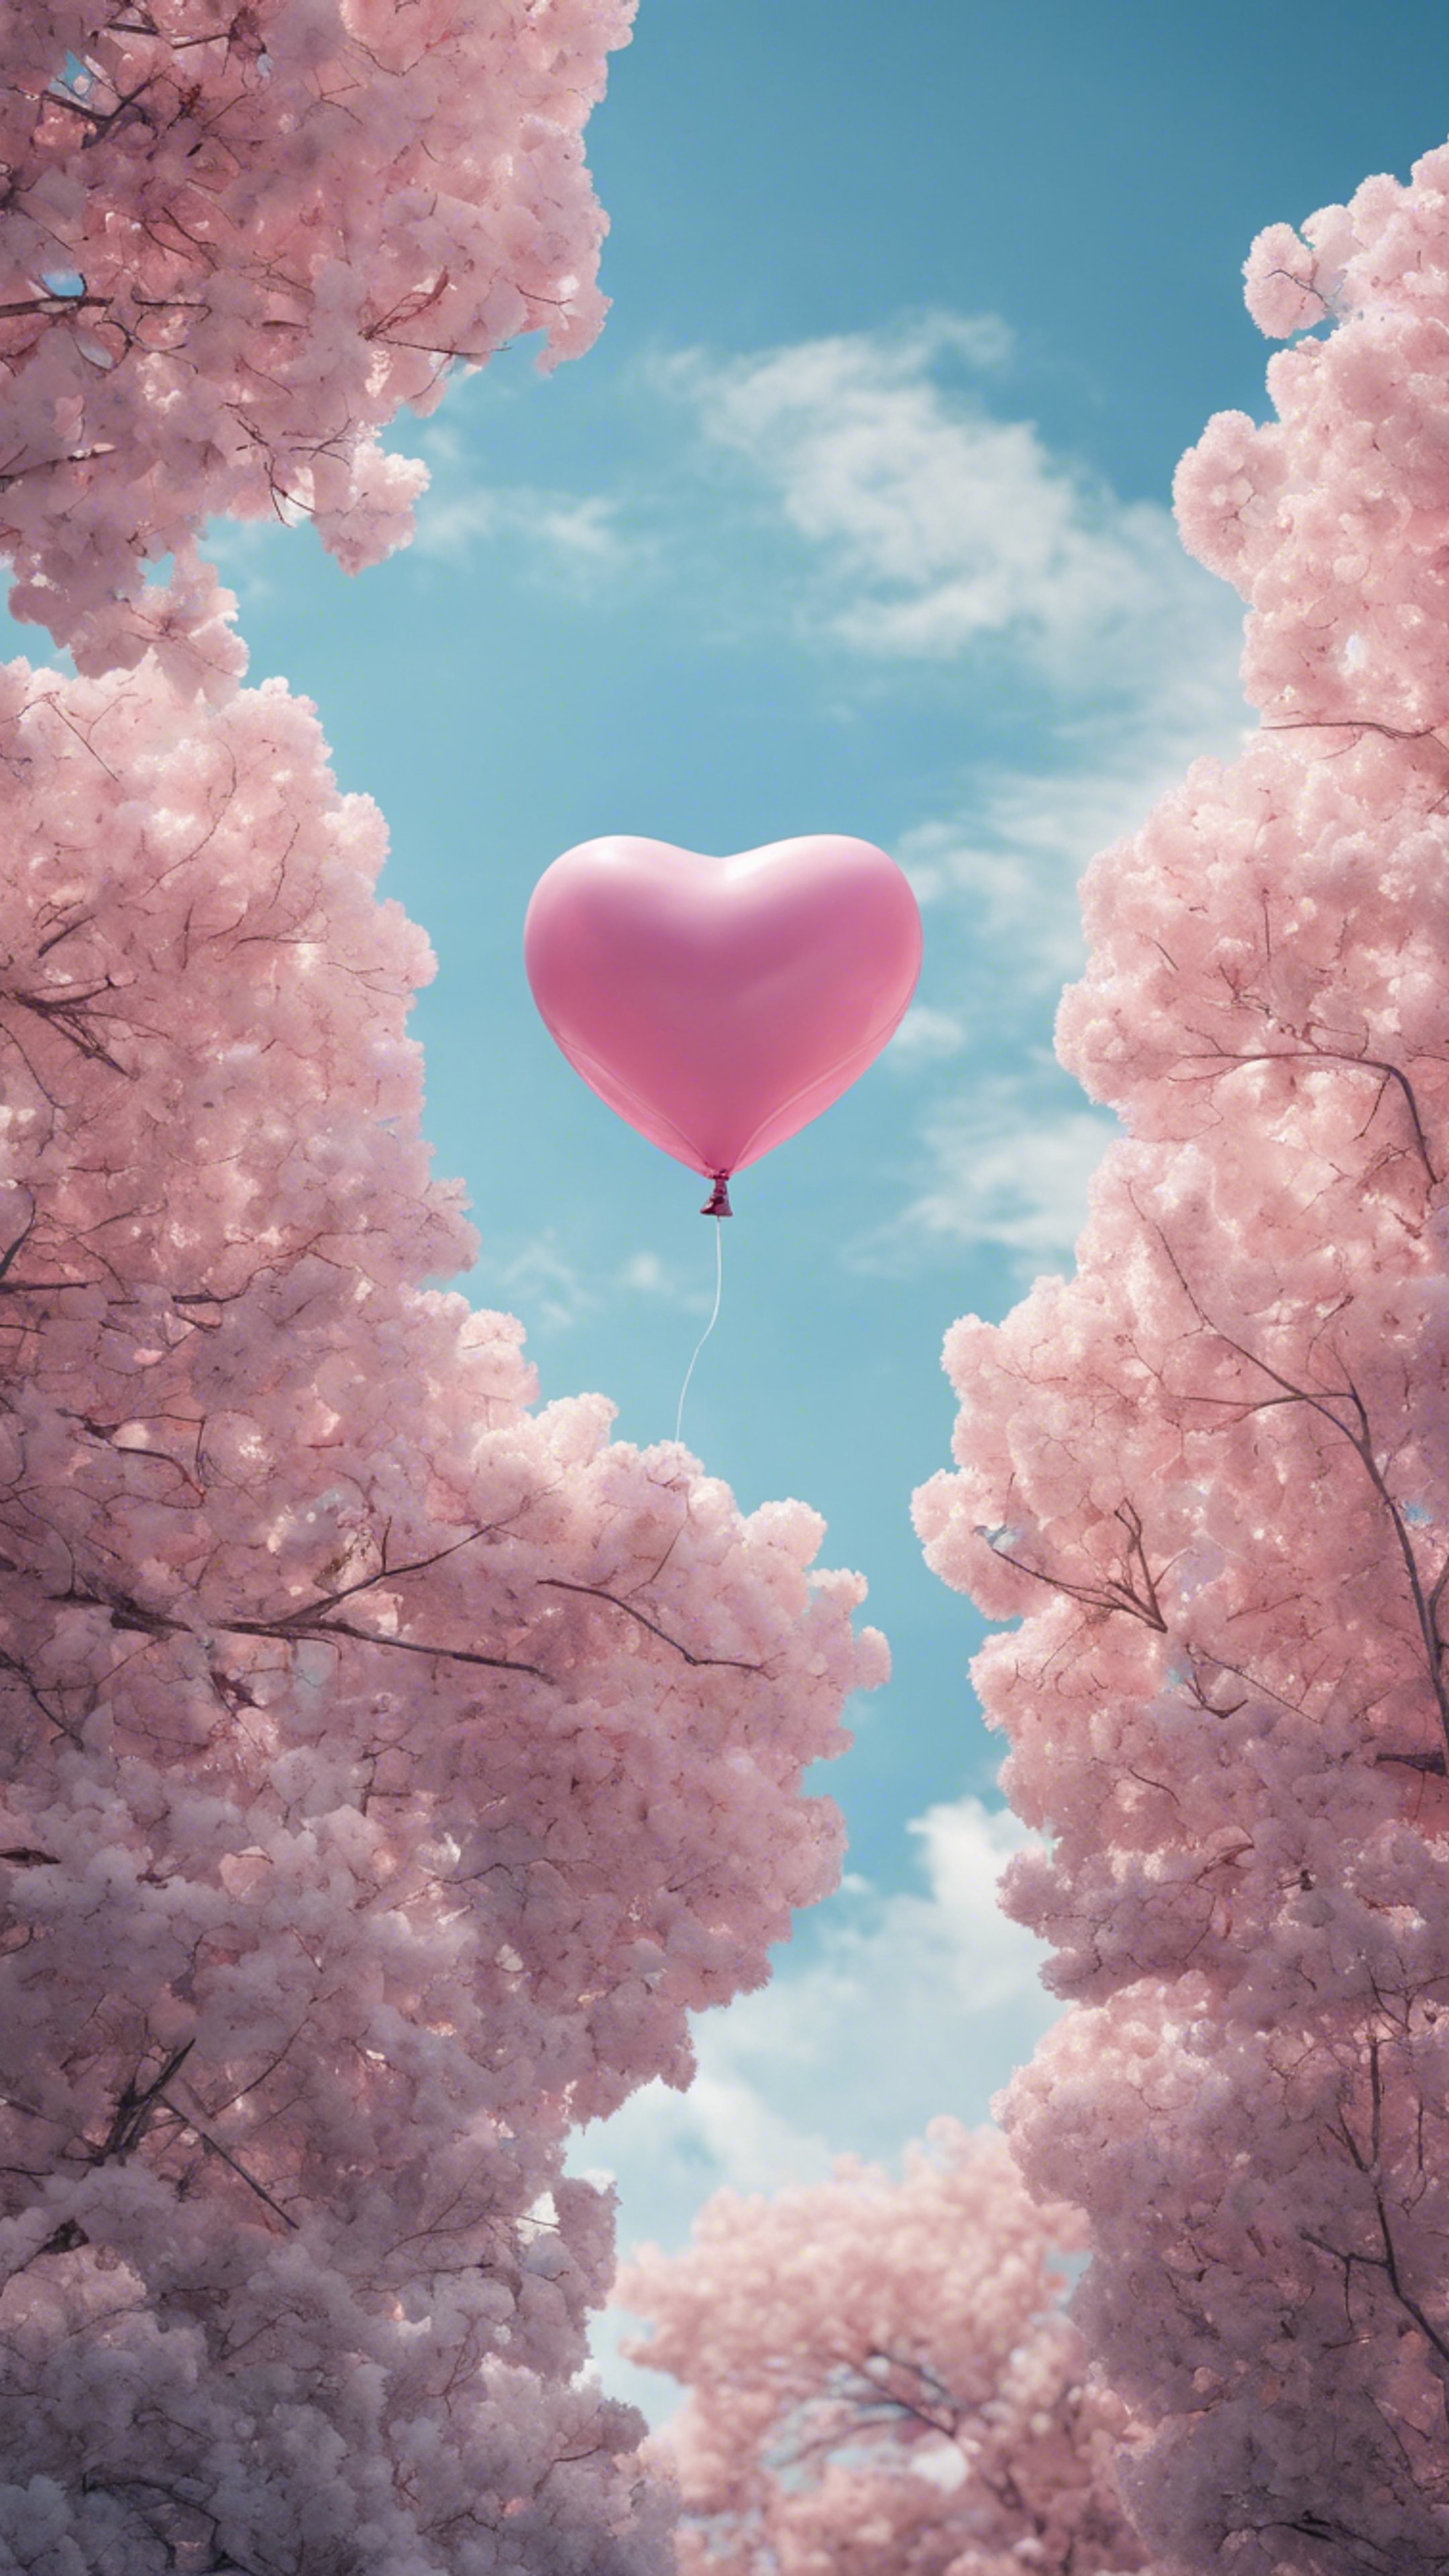 A pink heart-shaped balloon floating in the blue sky. Тапет[cd7c71404dc64bc7bb7c]